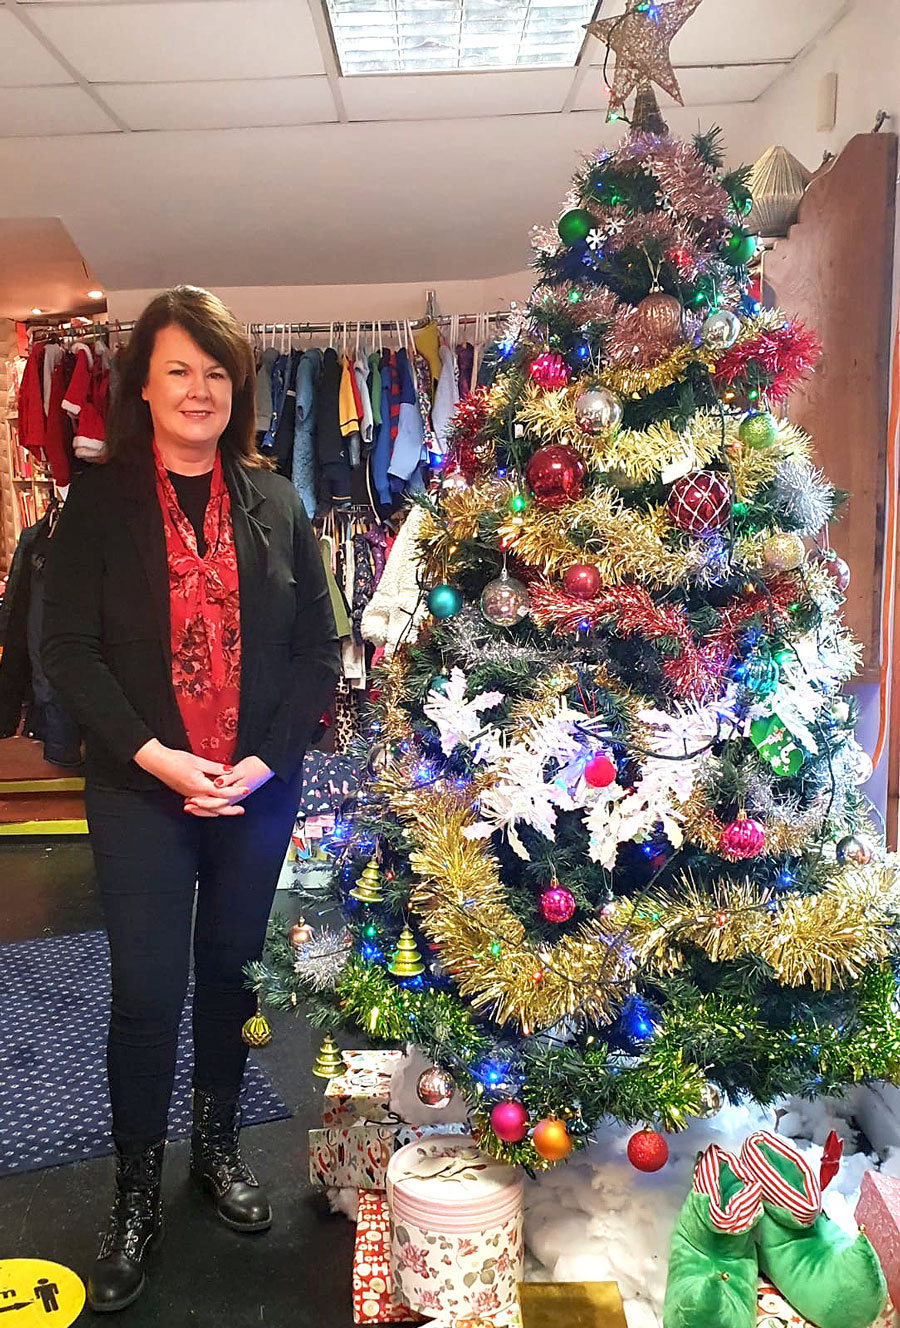 Crookstown Charity Boutique at Christmas